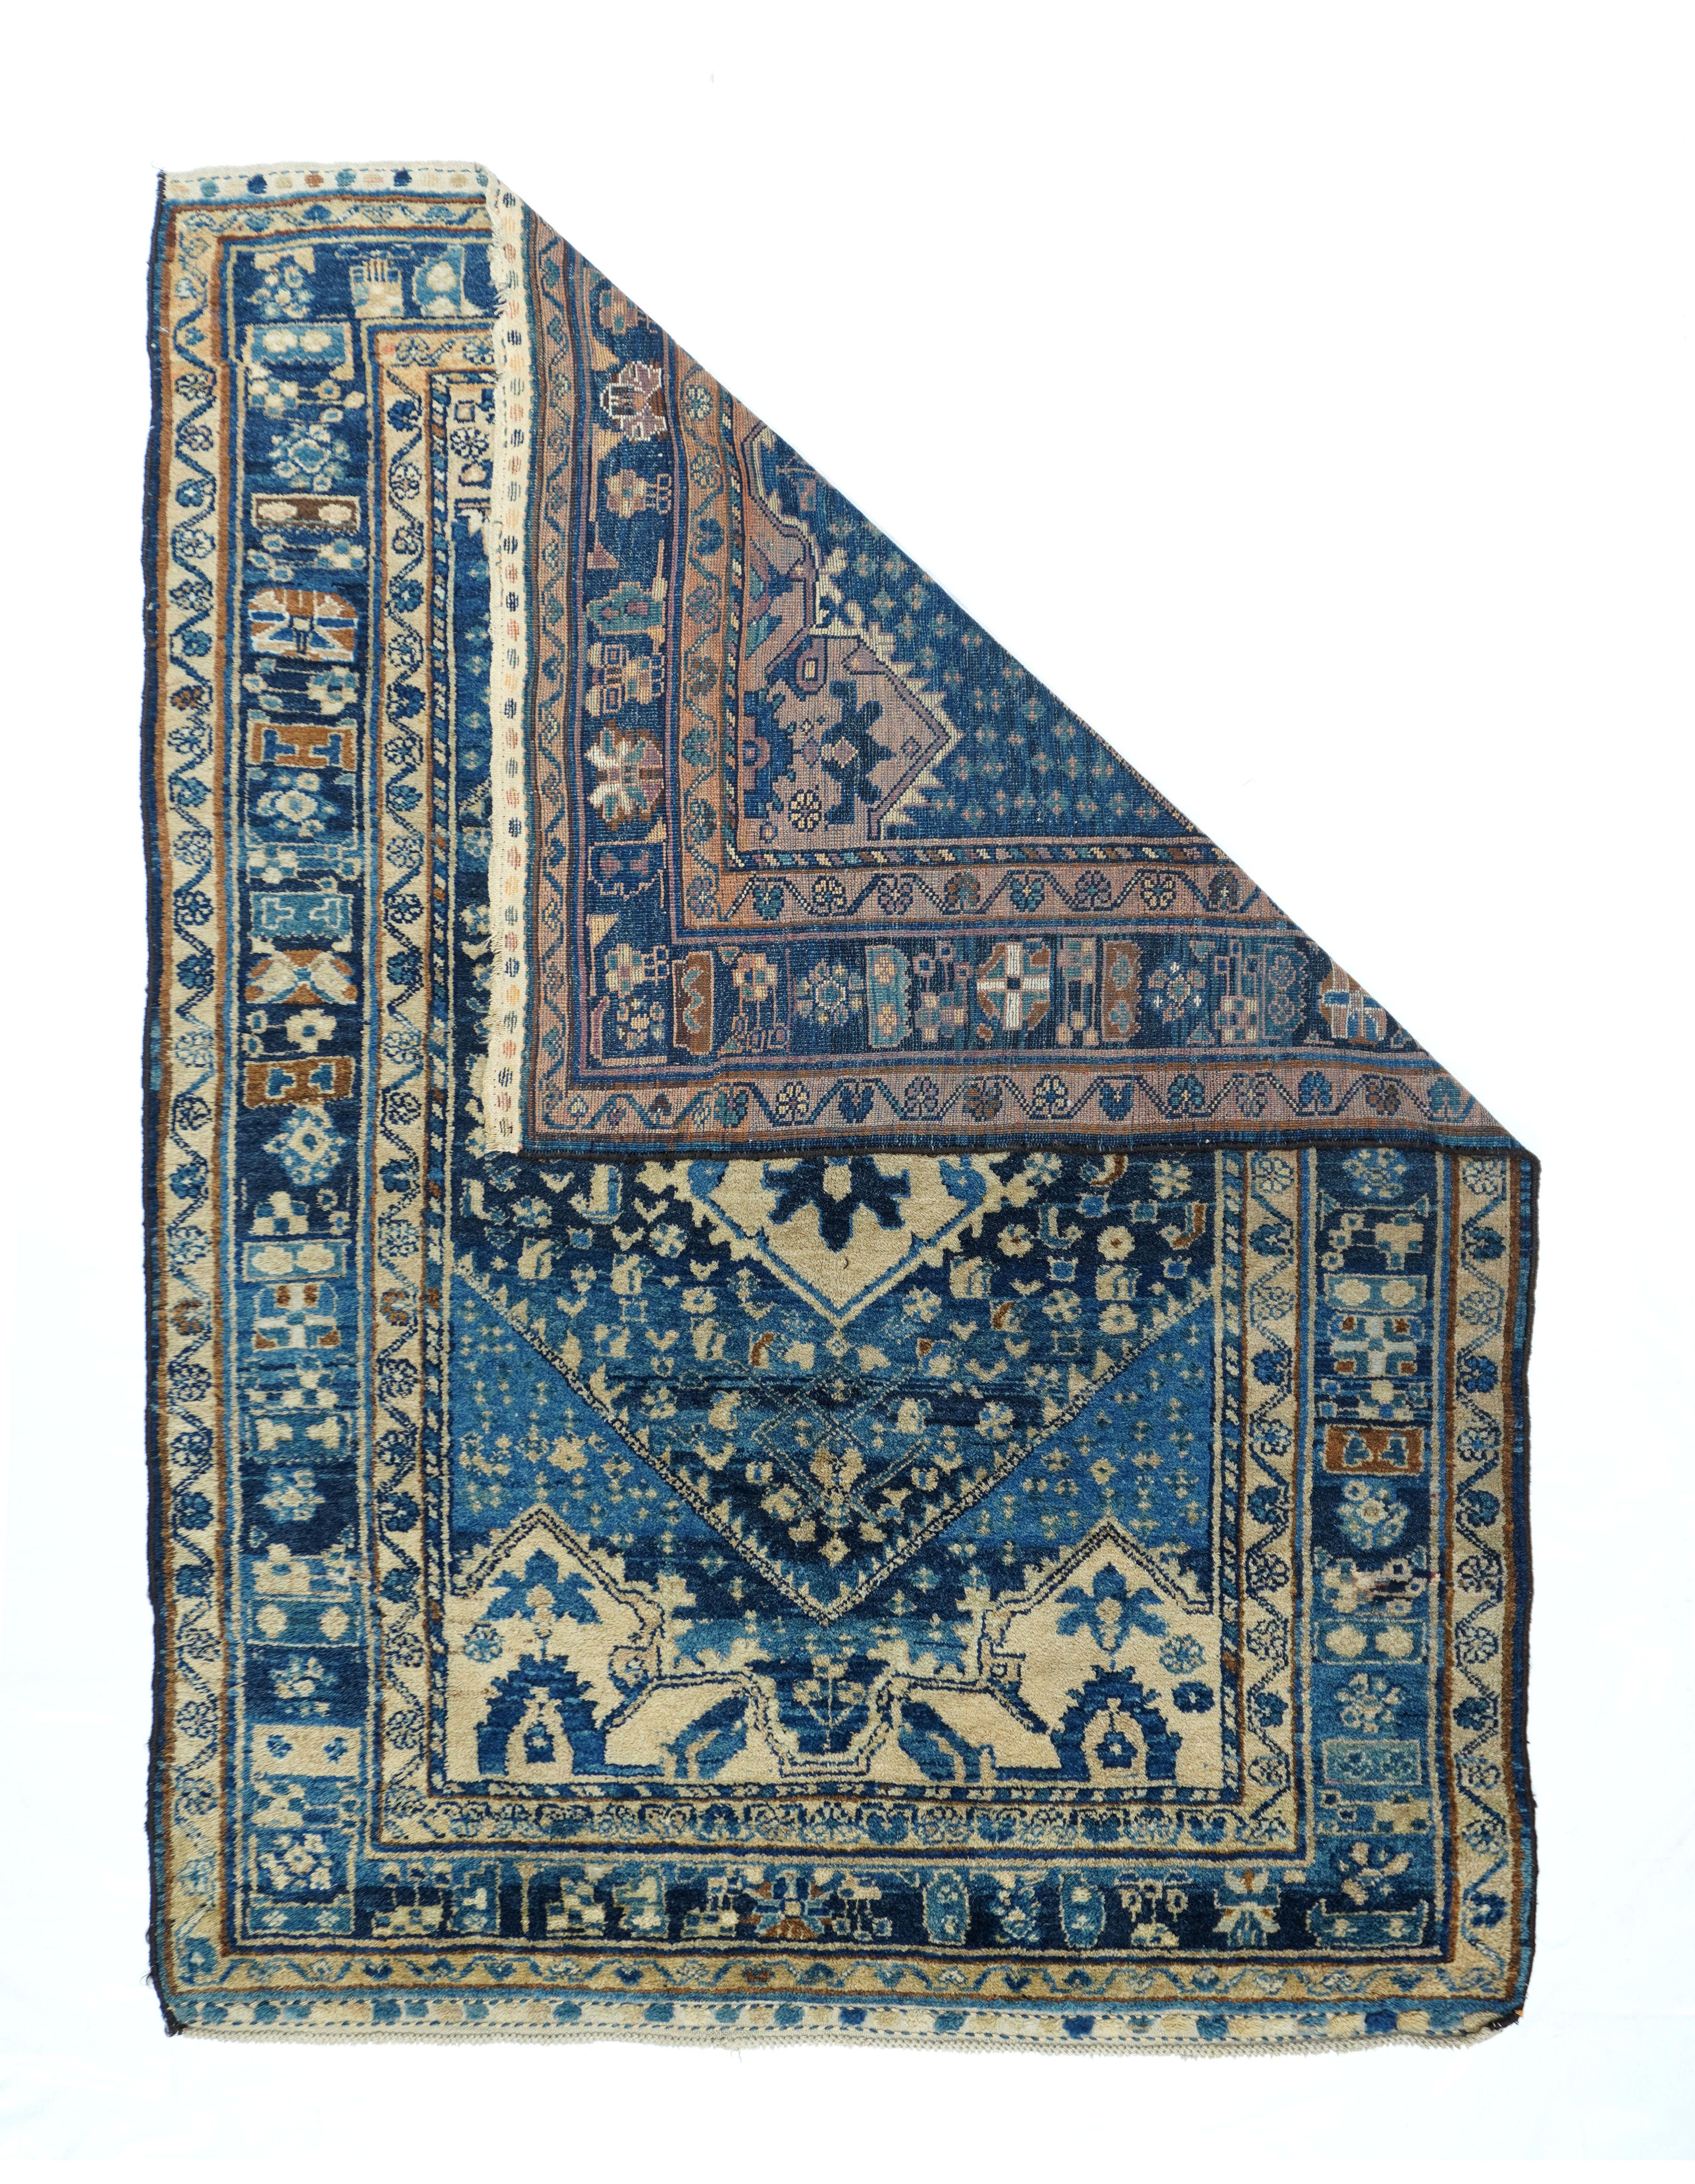 Antique Malayer rug 5'4'' x 7'6''. Abrashed dark to royal blue deep, conjoint corners display a scatter of small divided lozenge3s, with presenting a dark blue hexagonal field decorated with a semi-Herati scatter and accented by an irregular straw